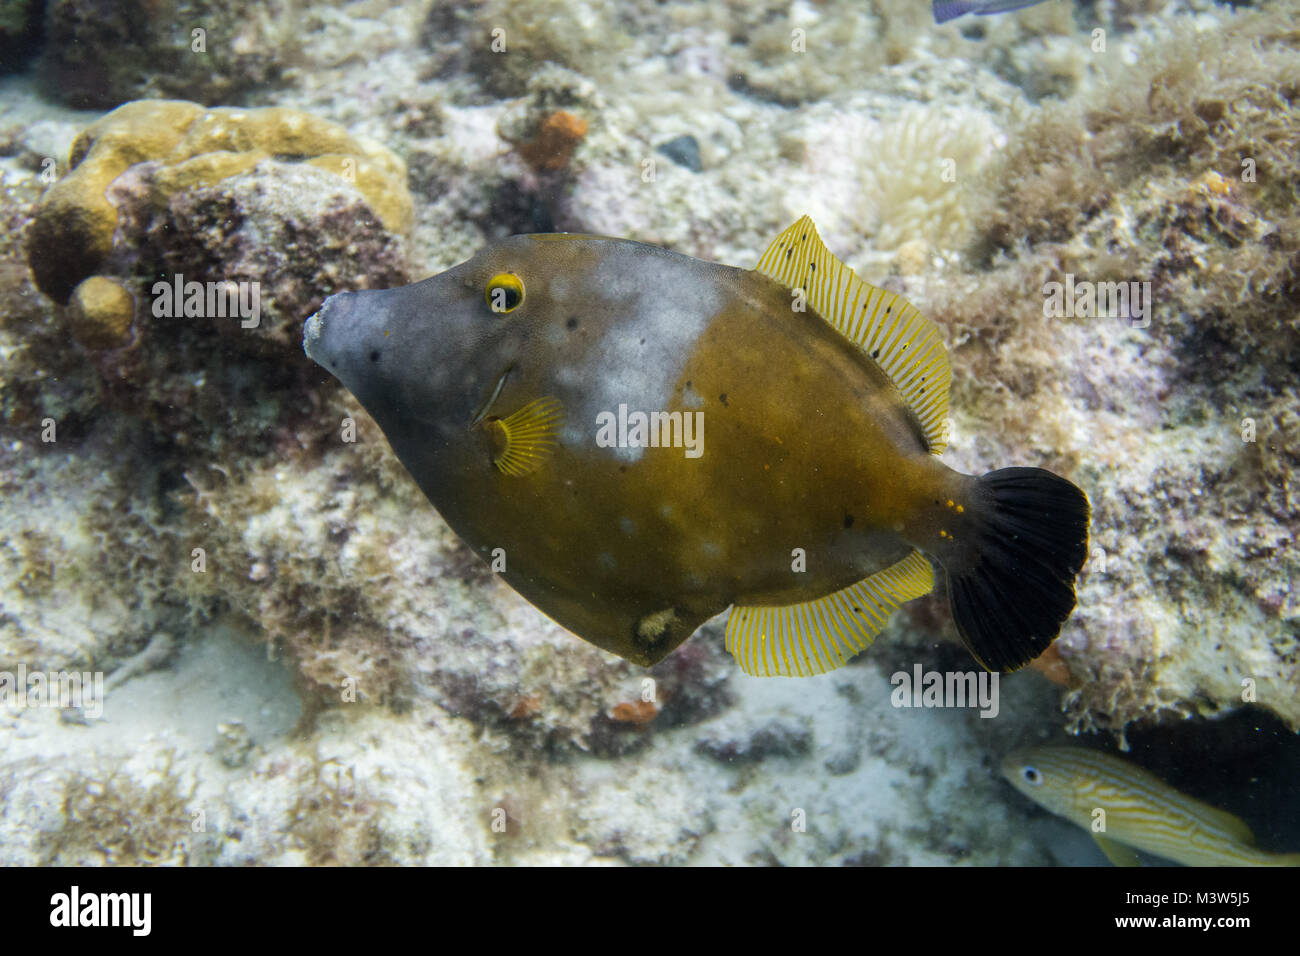 Cantherhines macrocerus, commonly known as the whitespotted filefish or American whitespotted filefish, is a marine fish found along the coast of Flor Stock Photo